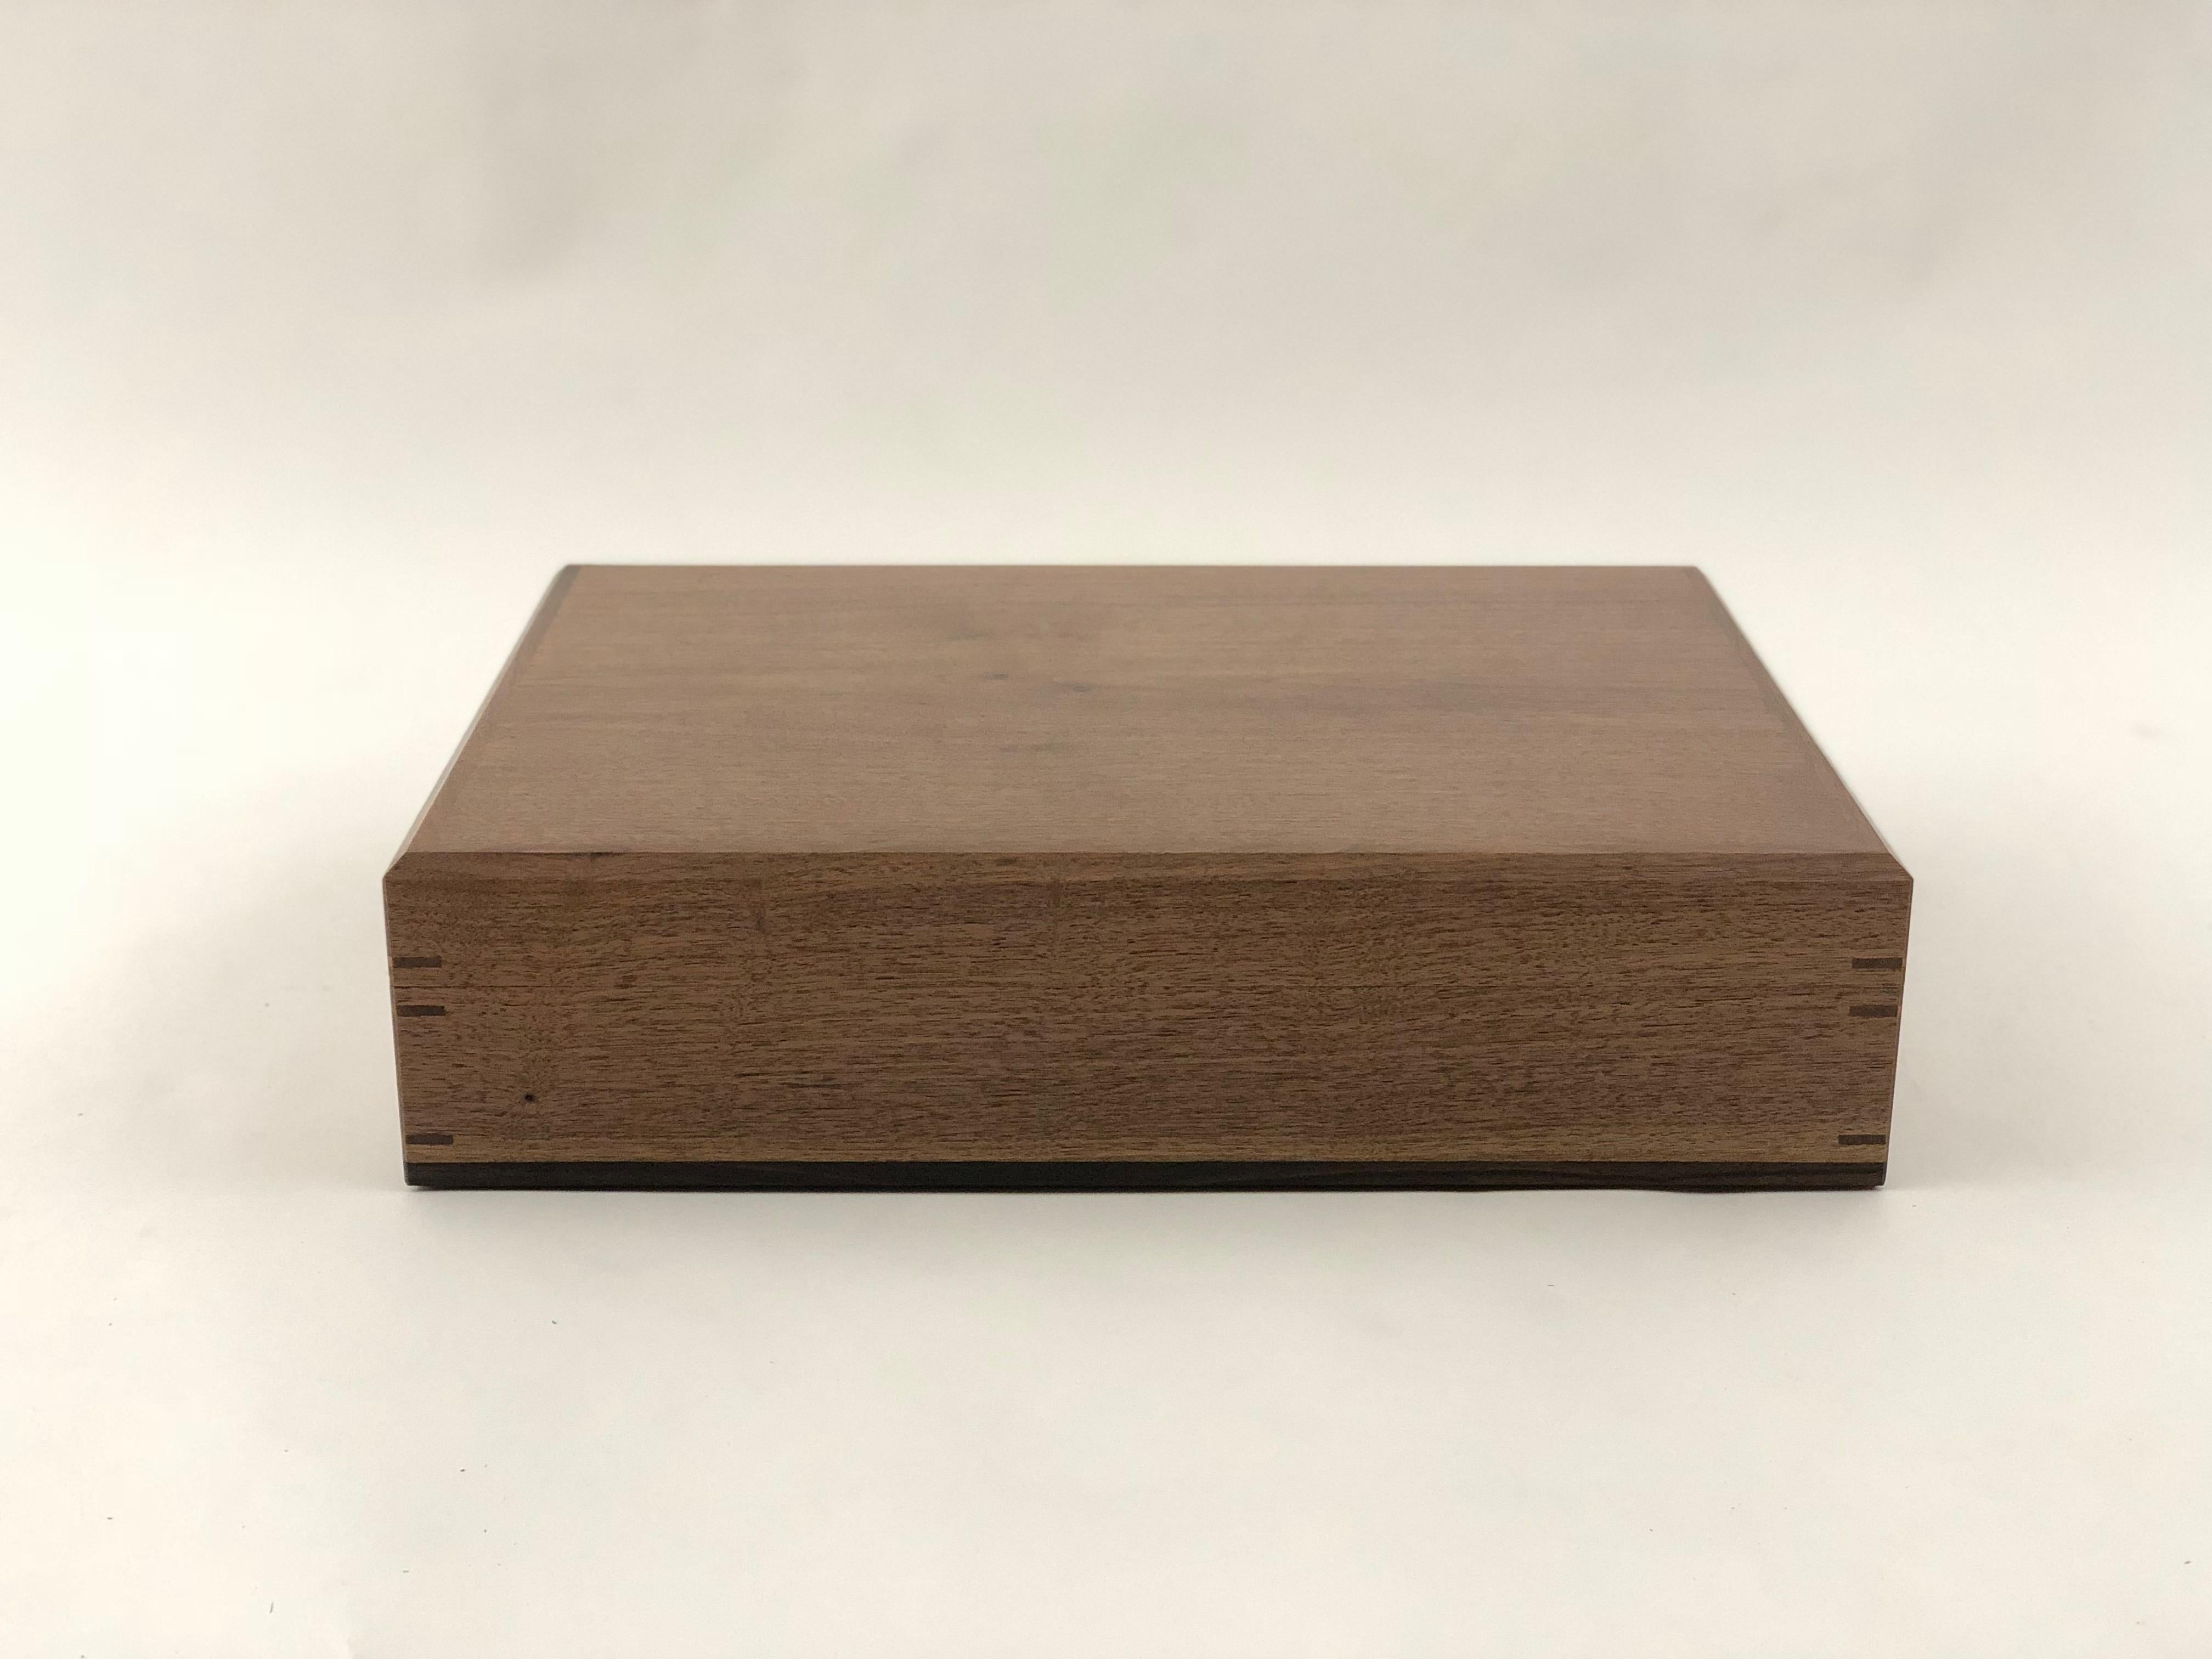 Desktop humidor in walnut and ebony. Interior liners in Honduran mahogany. I use Honduran mahogany in the construction of my humidors because it does not impart a flavor and because it is an exceptionally high quality material with the ability to